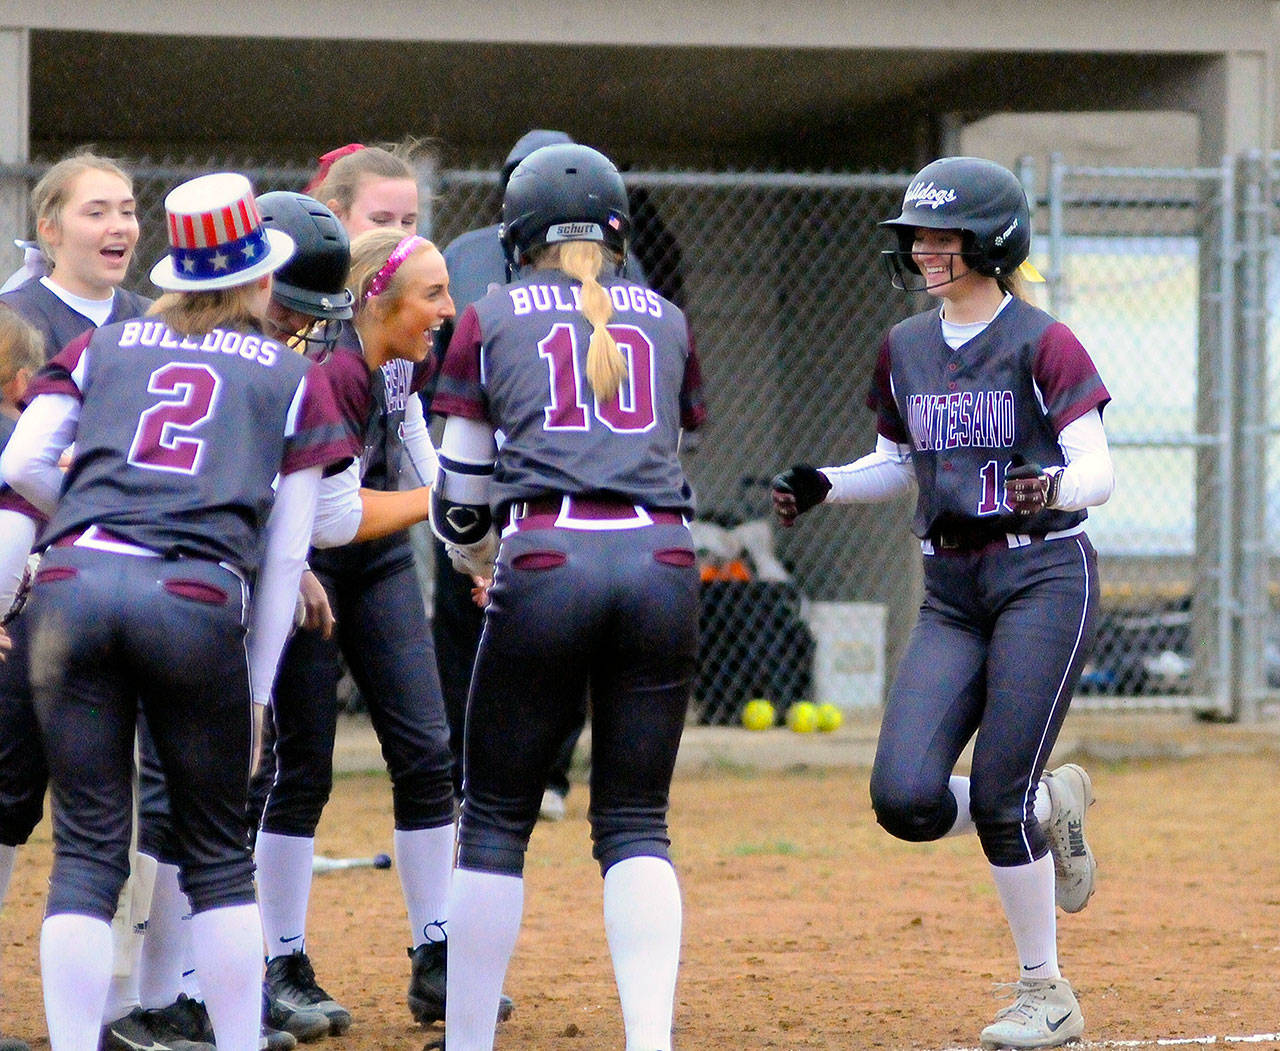 April 2: Campbell’s blast leads Montesano to win over Lakeside